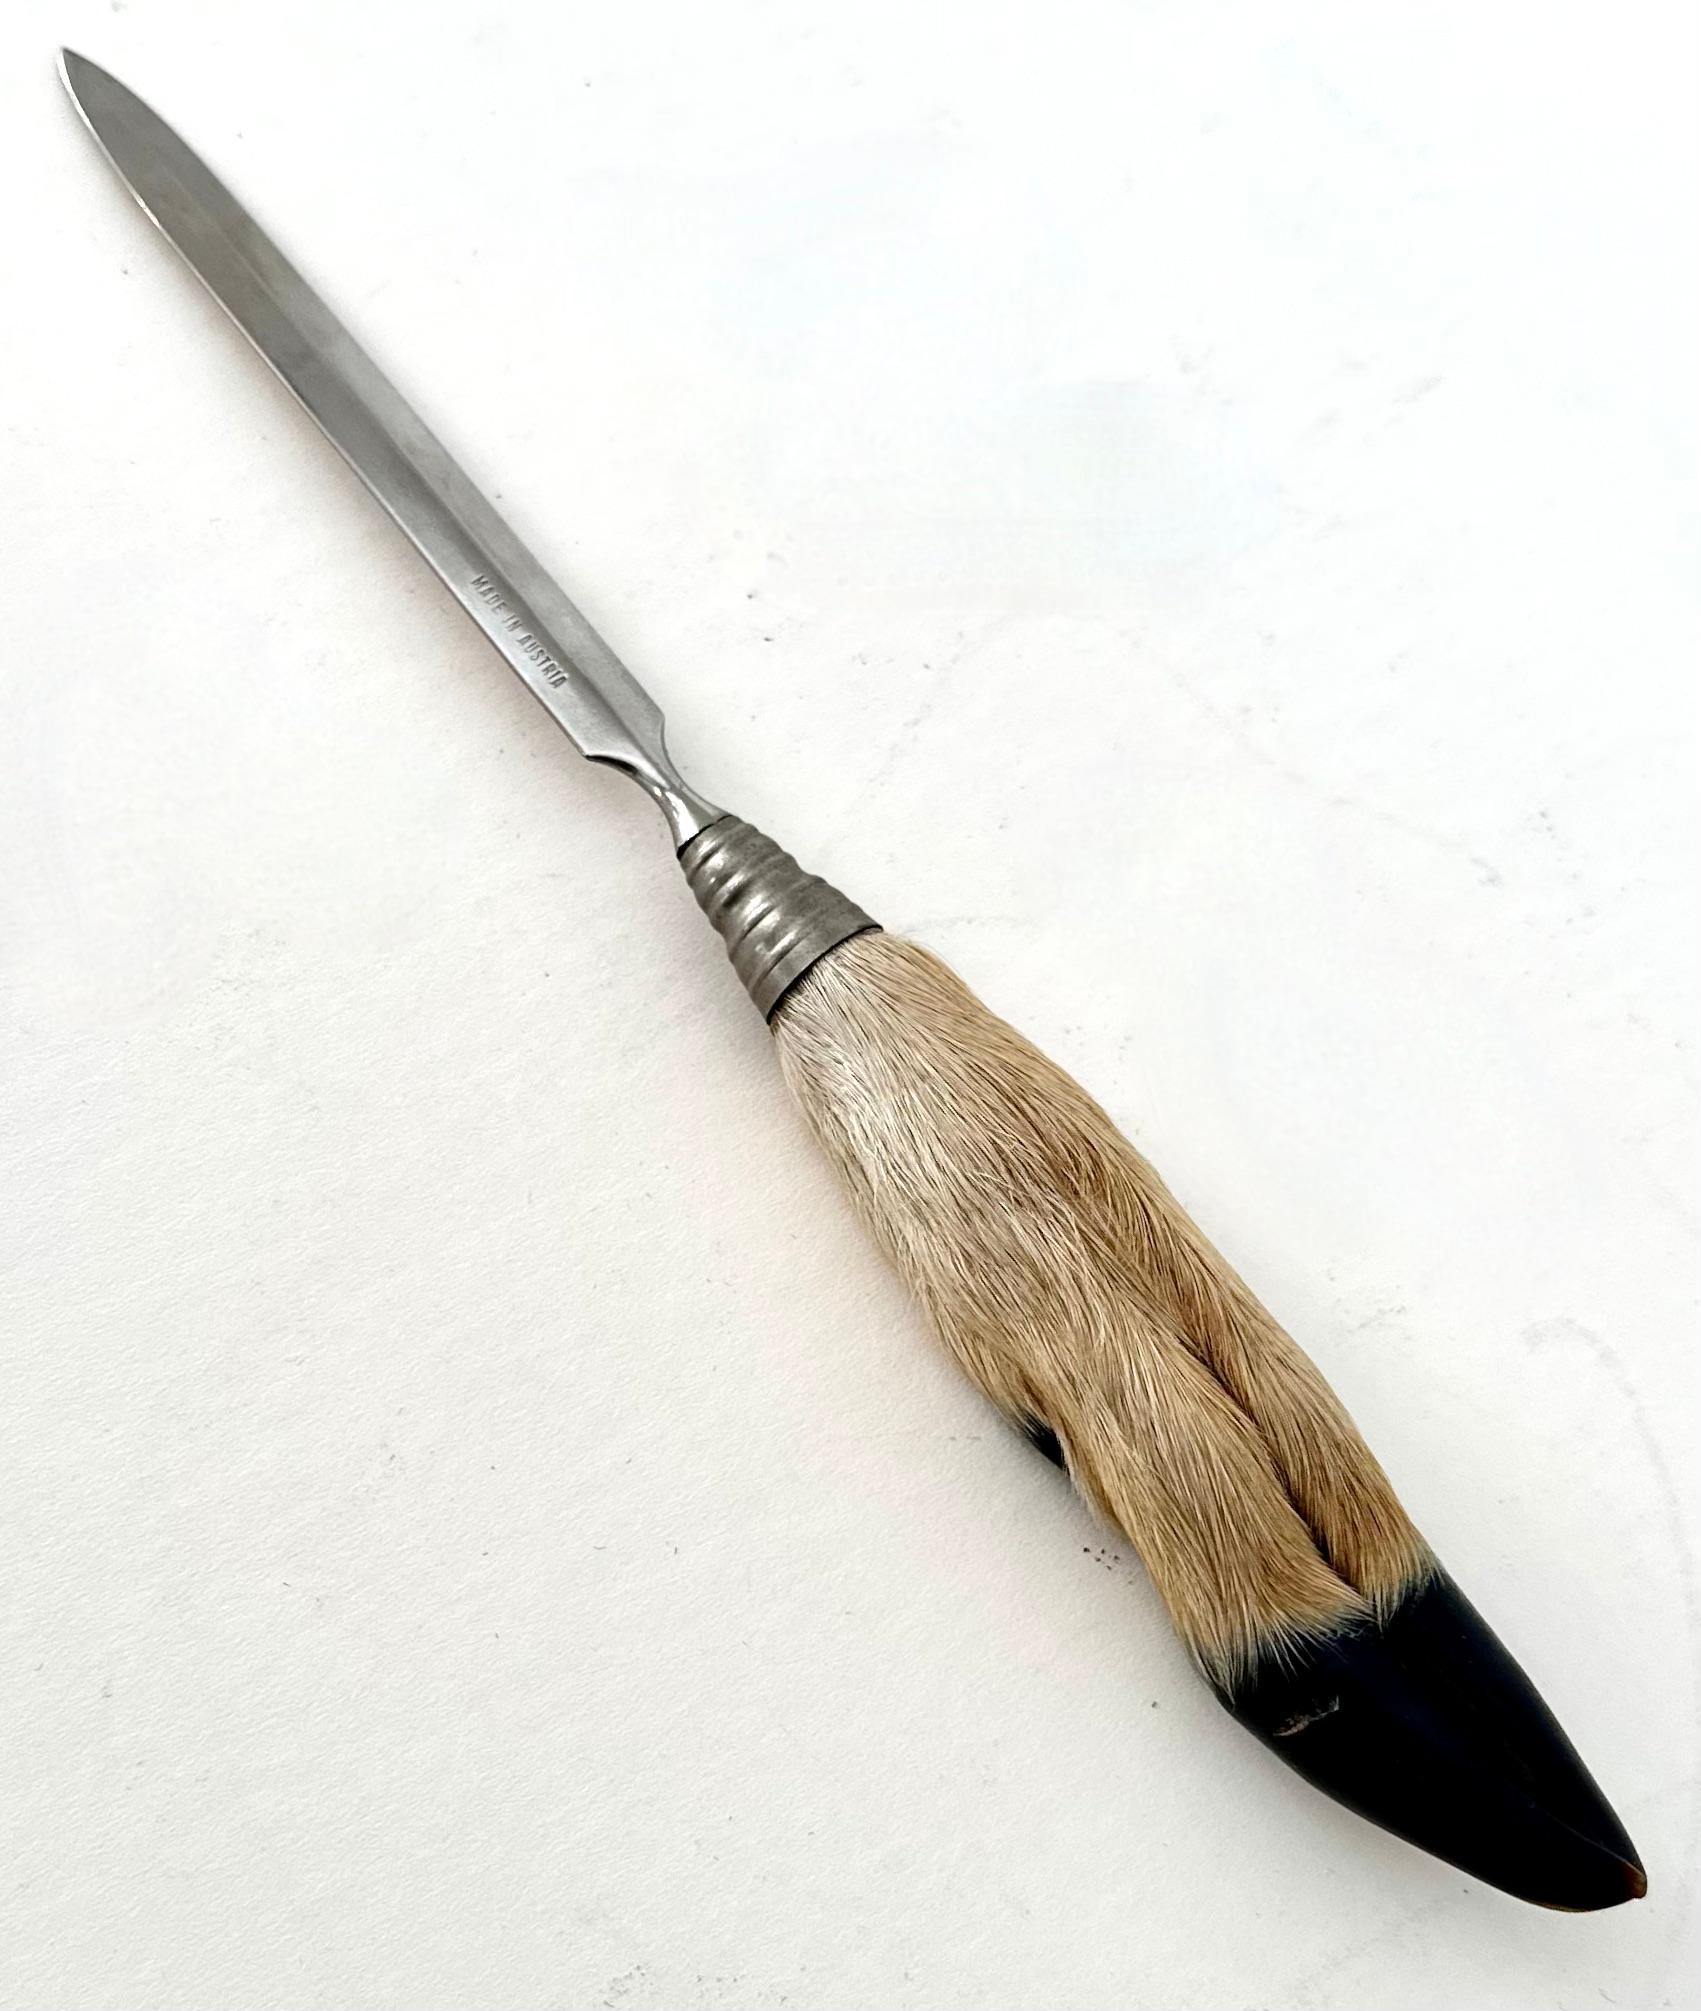 Hoof letter opener, made in Austria. The piece, in the style of Ralph Lauren, is a compliment to many settings, especially those that are more organic and neutral, perhaps in a cabin, or ranch style.

The opener is well made and makes a nice